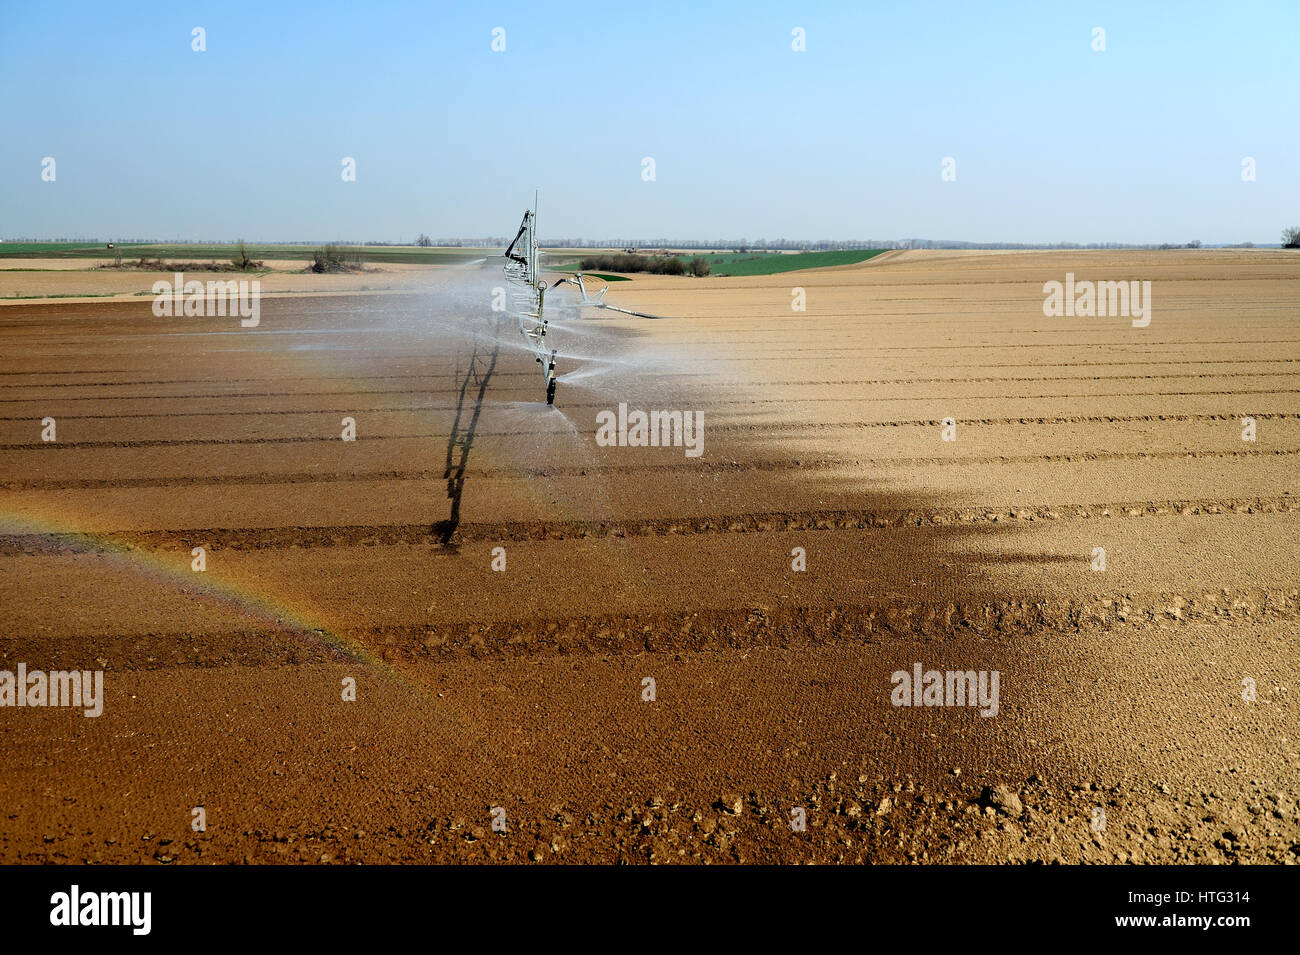 agricultural, agriculture, center, country, crop, crops, farm, farming, farms, field, fields, grain, grains, green, grow, growing, grows, earth, Stock Photo